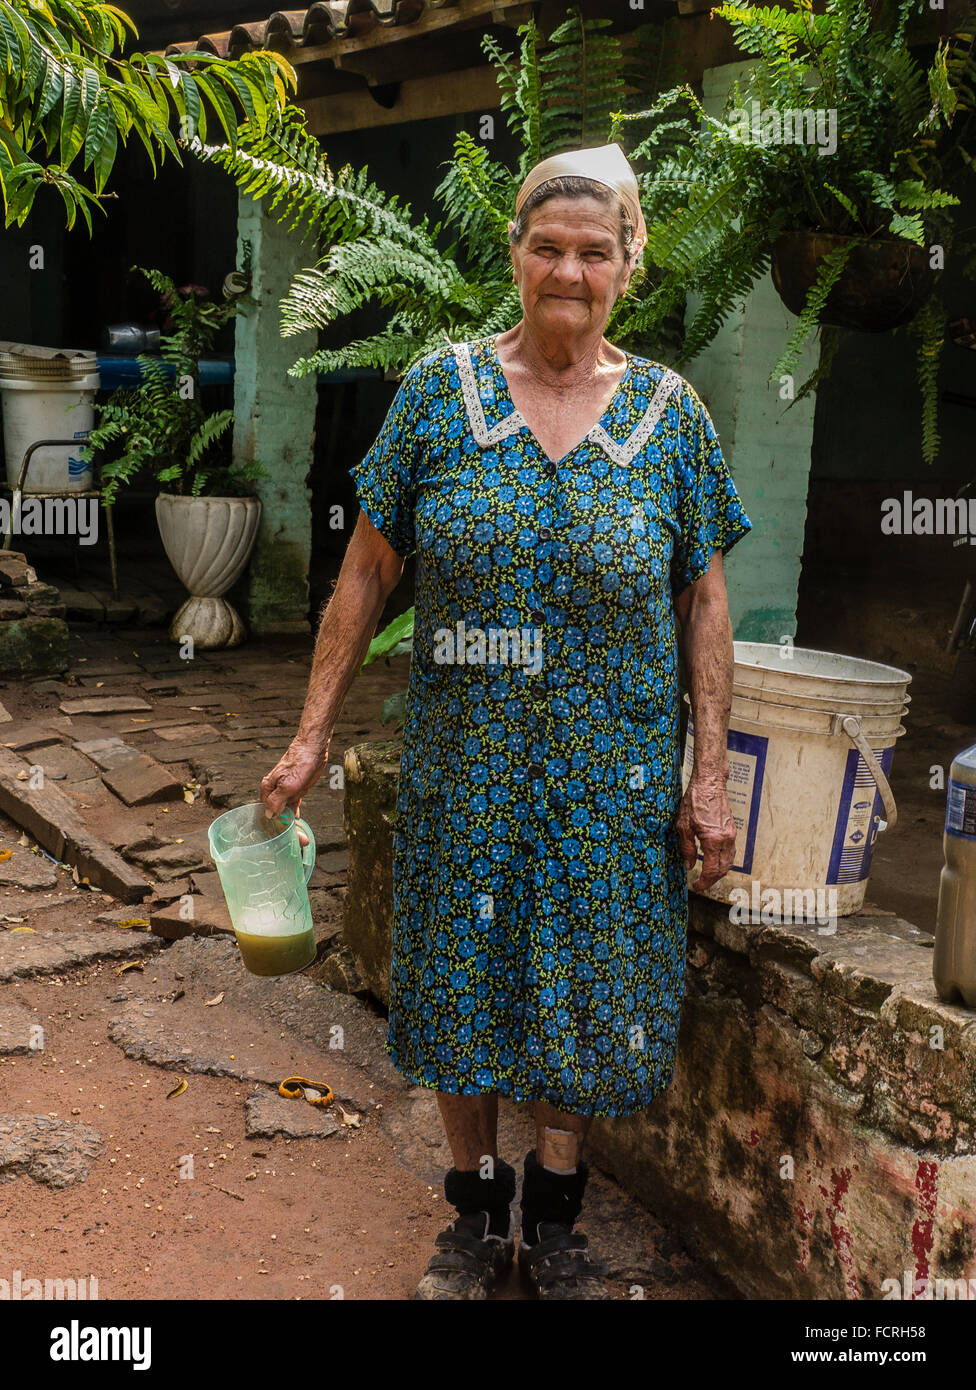 A senior citizen female farmer in Paraguay who produces mosto helado, a local beverage made from sugar cane juice. Stock Photo